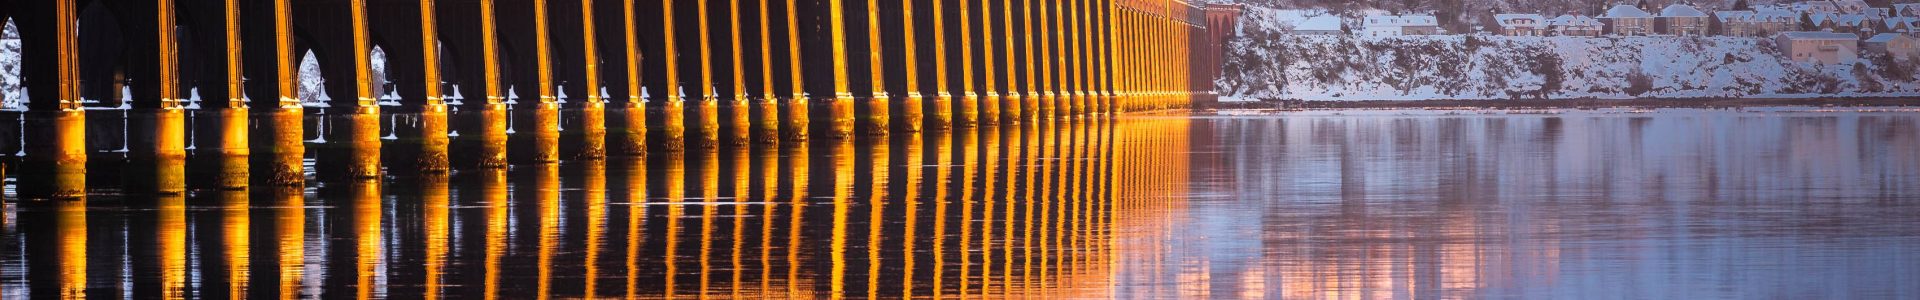 The central section of the Tay Railway Bridge passing across a flat-calm Tay at sunset, Dundee, Scotland. DD130